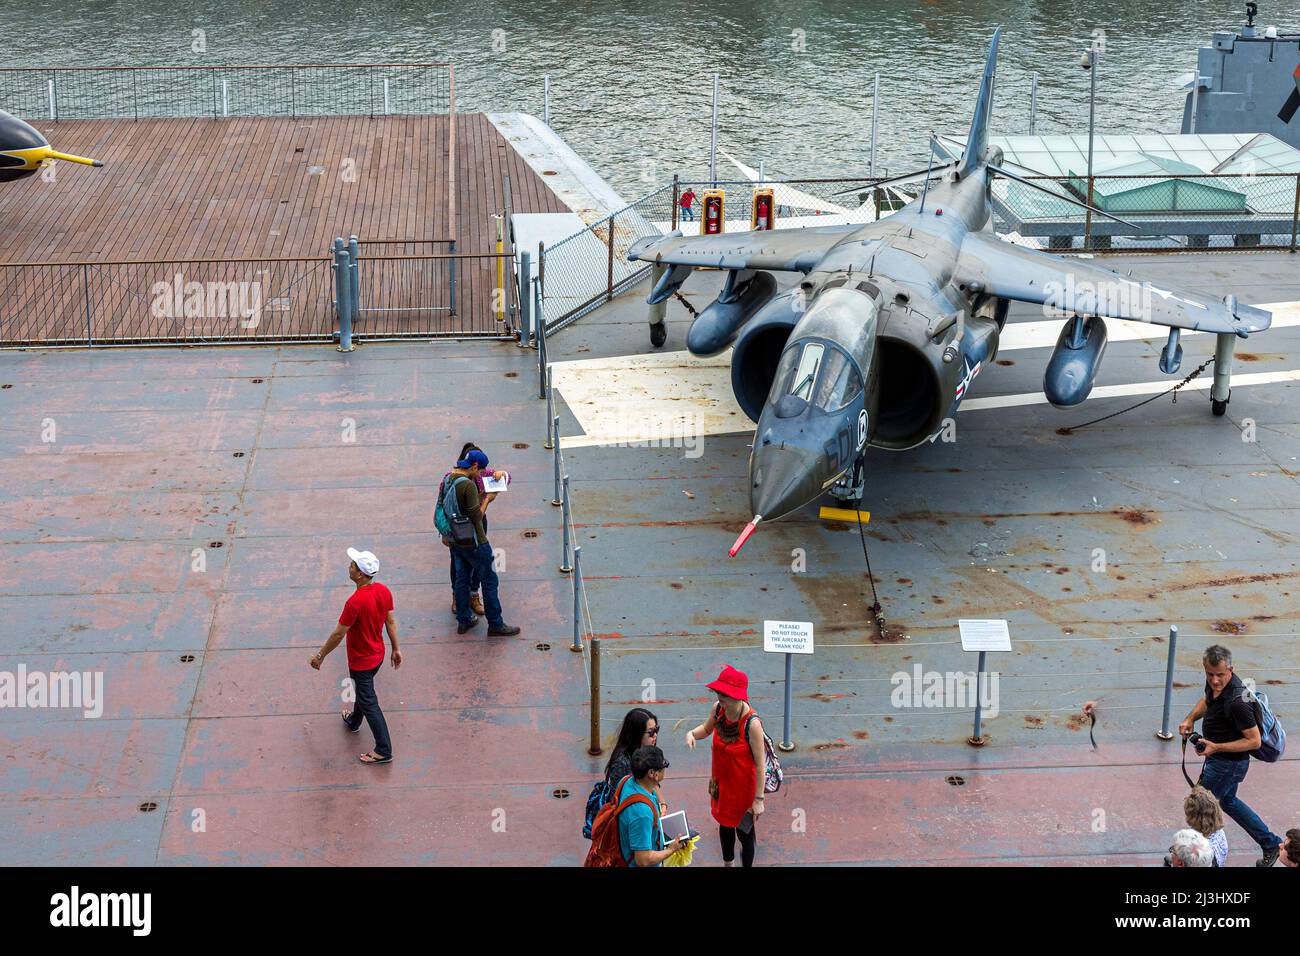 12 AV/W 46 ST, New York City, NY, USA, British Aerospace AV-8C Harrier at the Intrepid Sea, Air & Space Museum - an american military and maritime history museum showcases the aircraft carrier USS Intrepid. Stock Photo